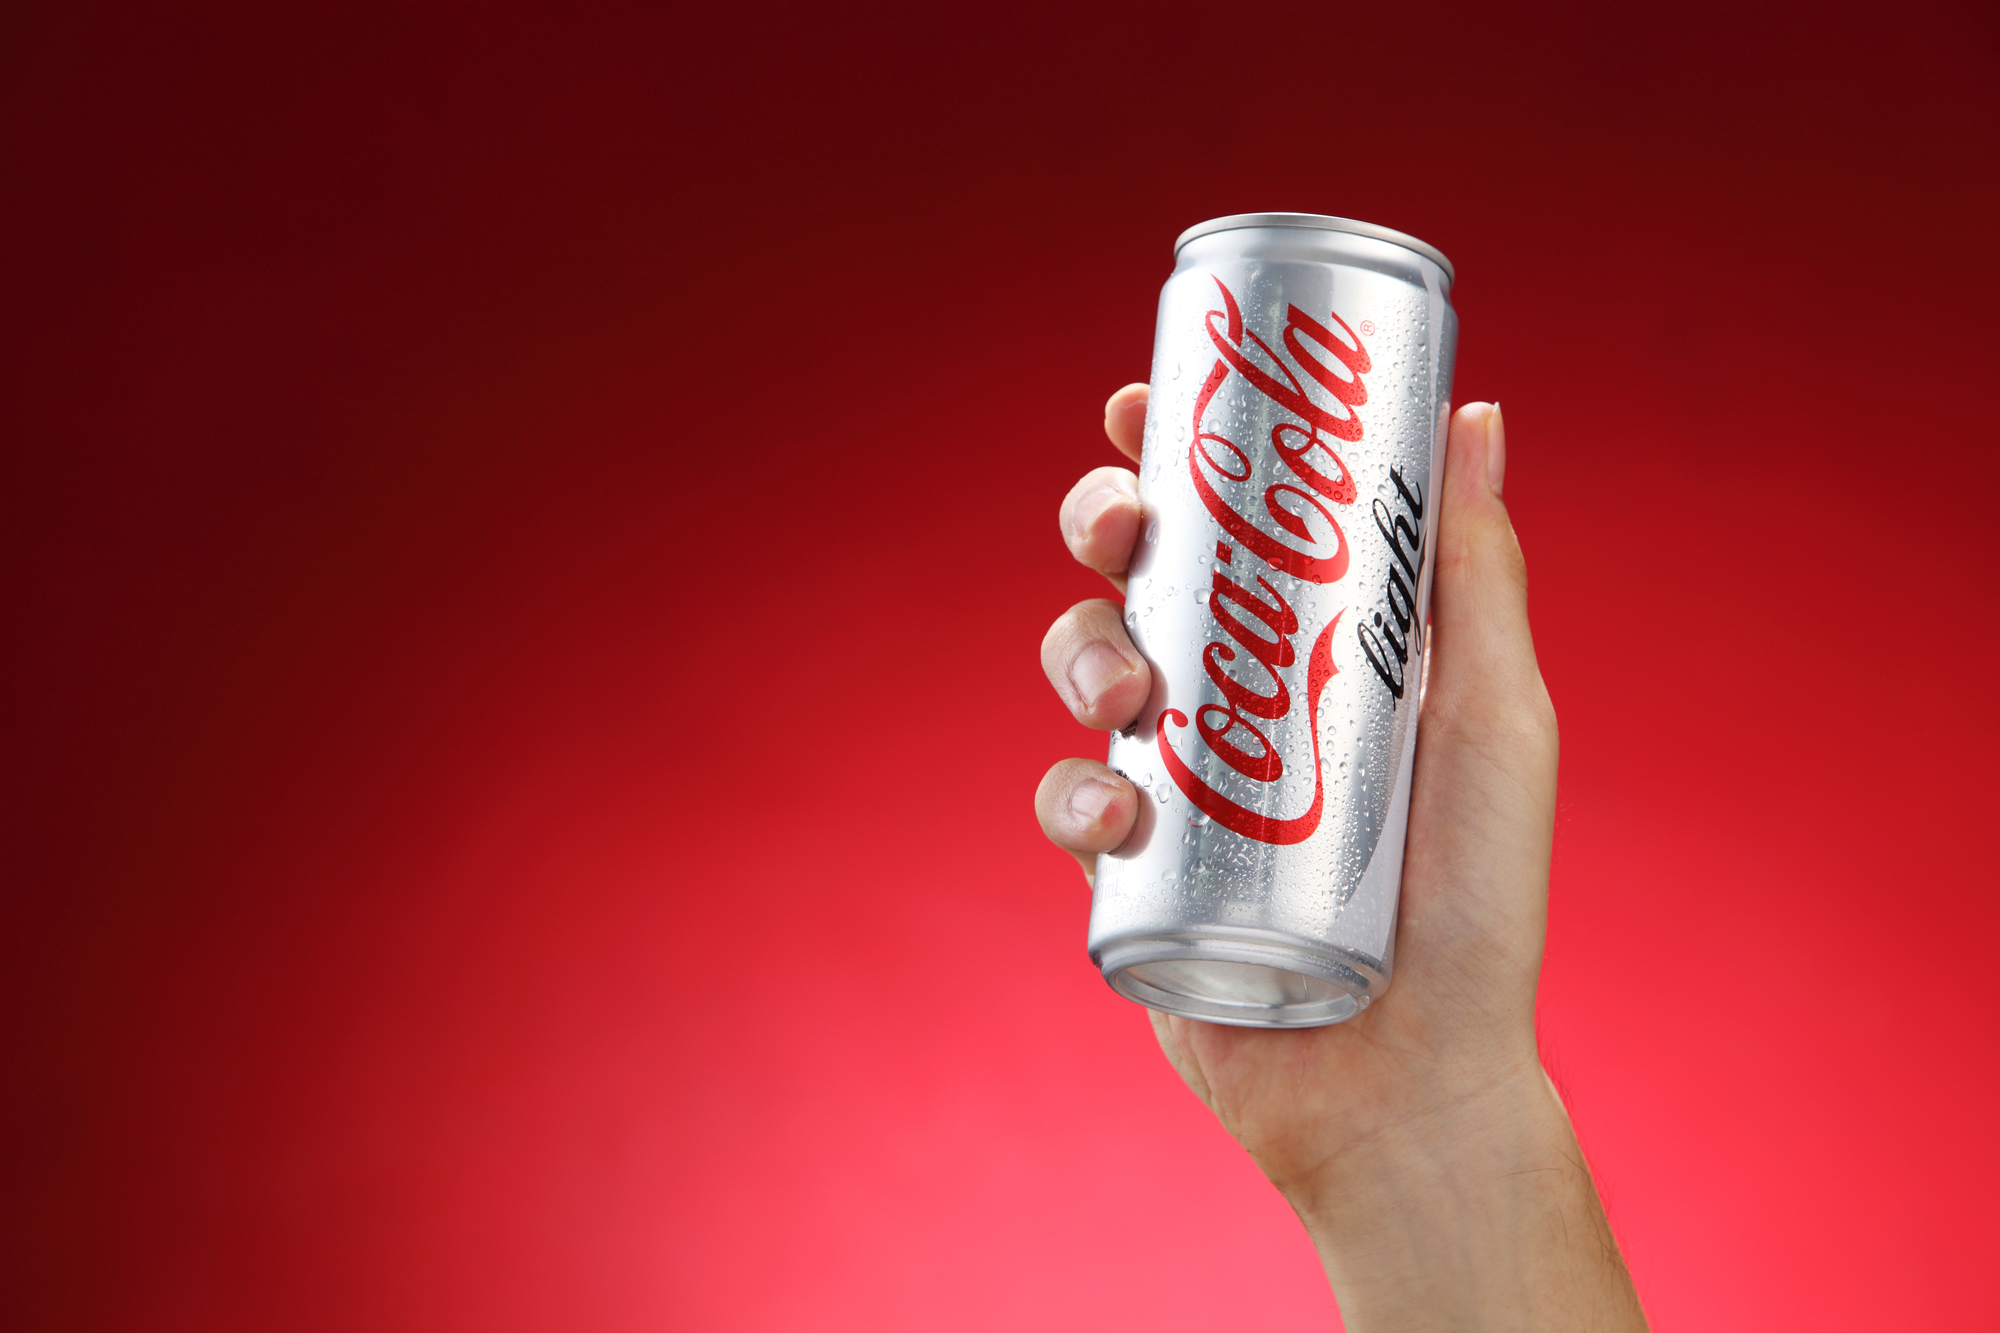 Kuala Lumpur,Malaysia 11th July 2016, Hand hold a can Coca-Cola light on red background. Coca Cola drinks are produced and manufactured by The Coca-Cola Company.